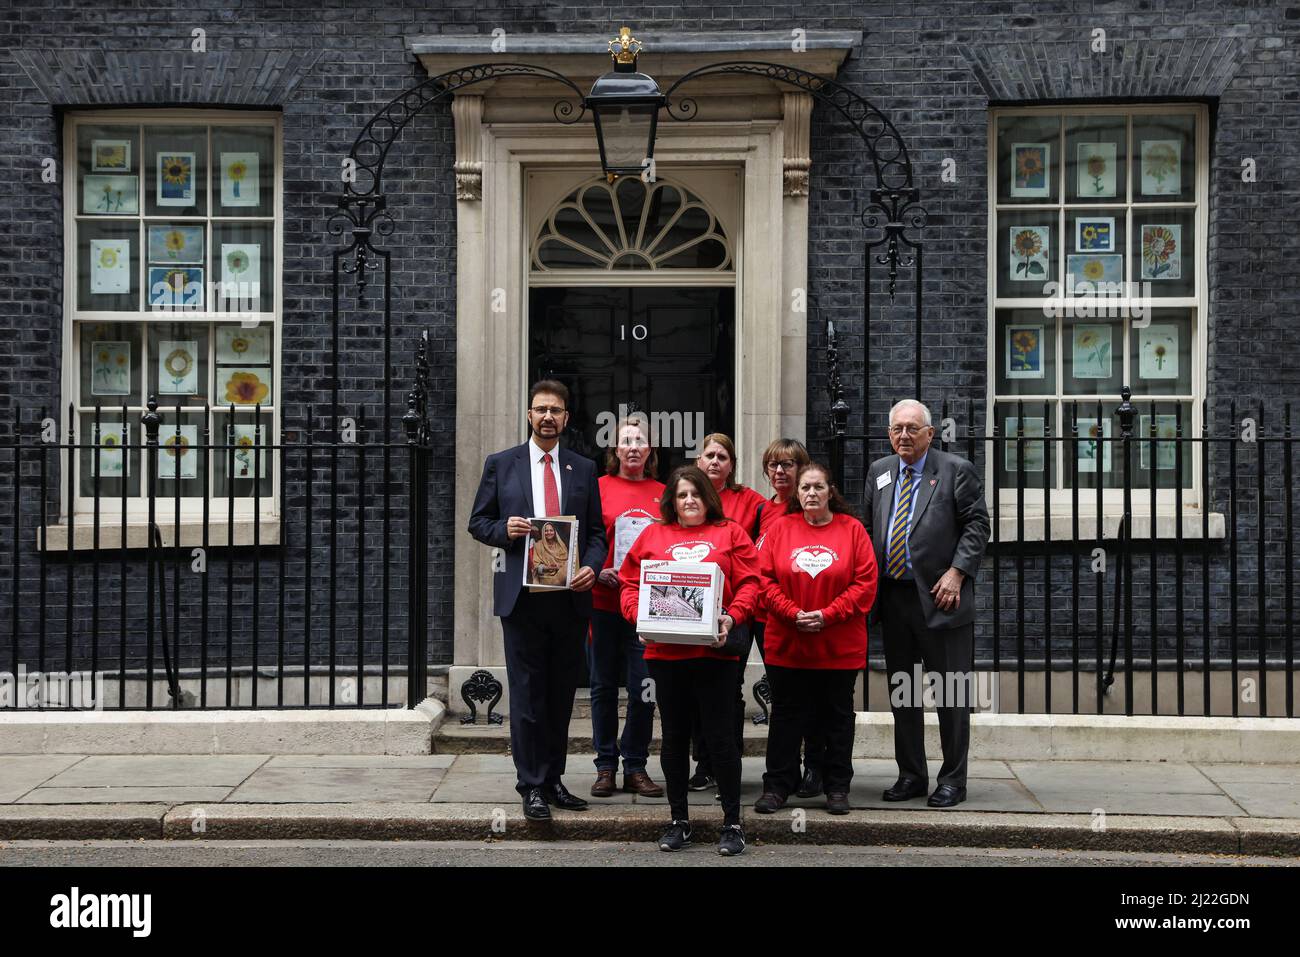 Members of the COVID-19 Bereaved Families for Justice UK stand outside 10 Downing Street on national day of reflection to mark the 1 year anniversary of The National Covid Memorial Wall creation, in London, Britain March 29, 2022. REUTERS/Tom Nicholson Stock Photo